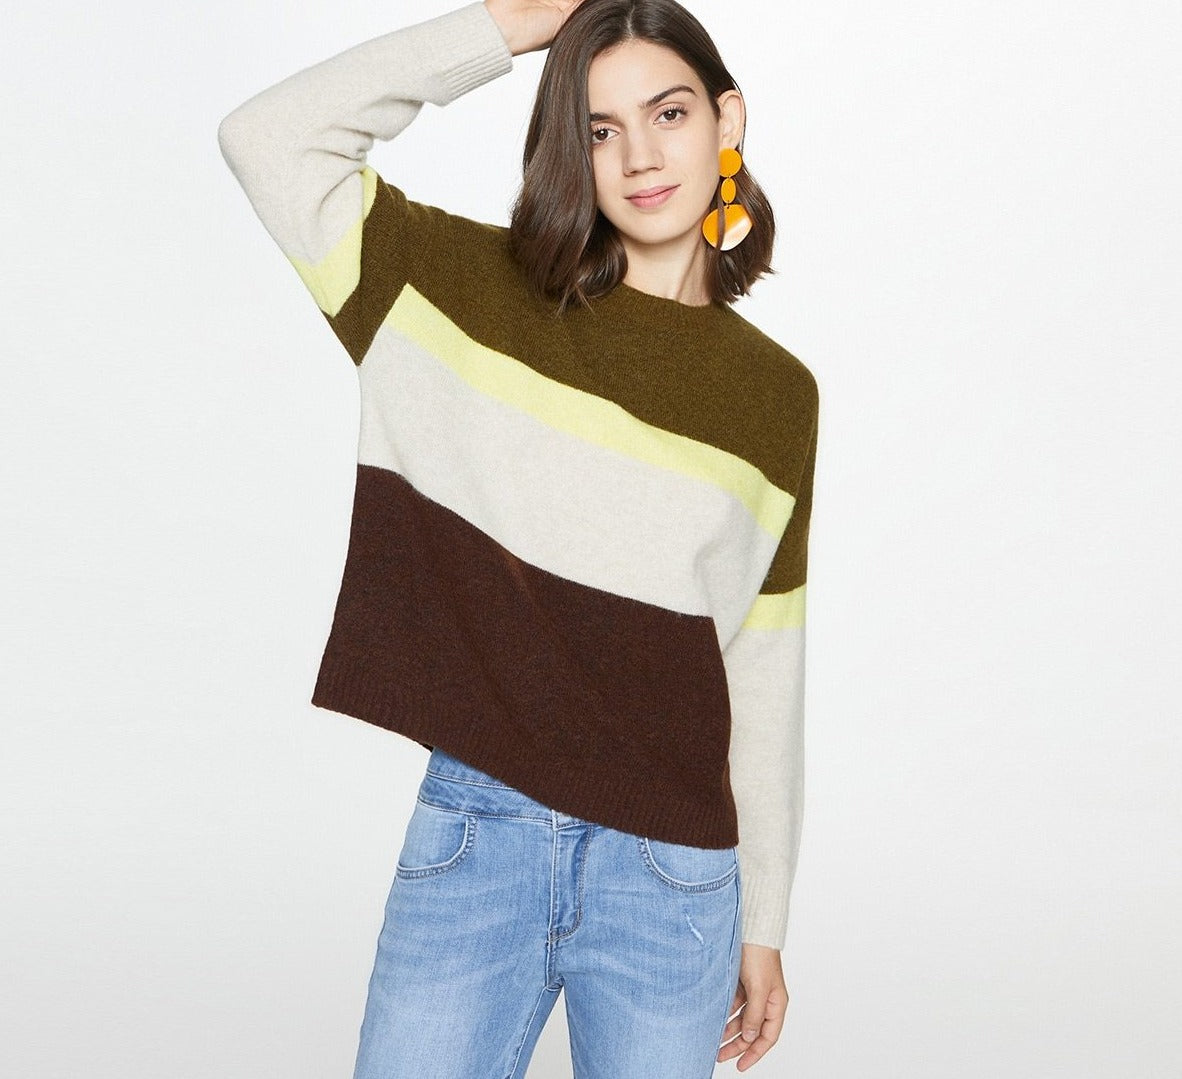 Women's Colorful Joint Knit with Round Collar